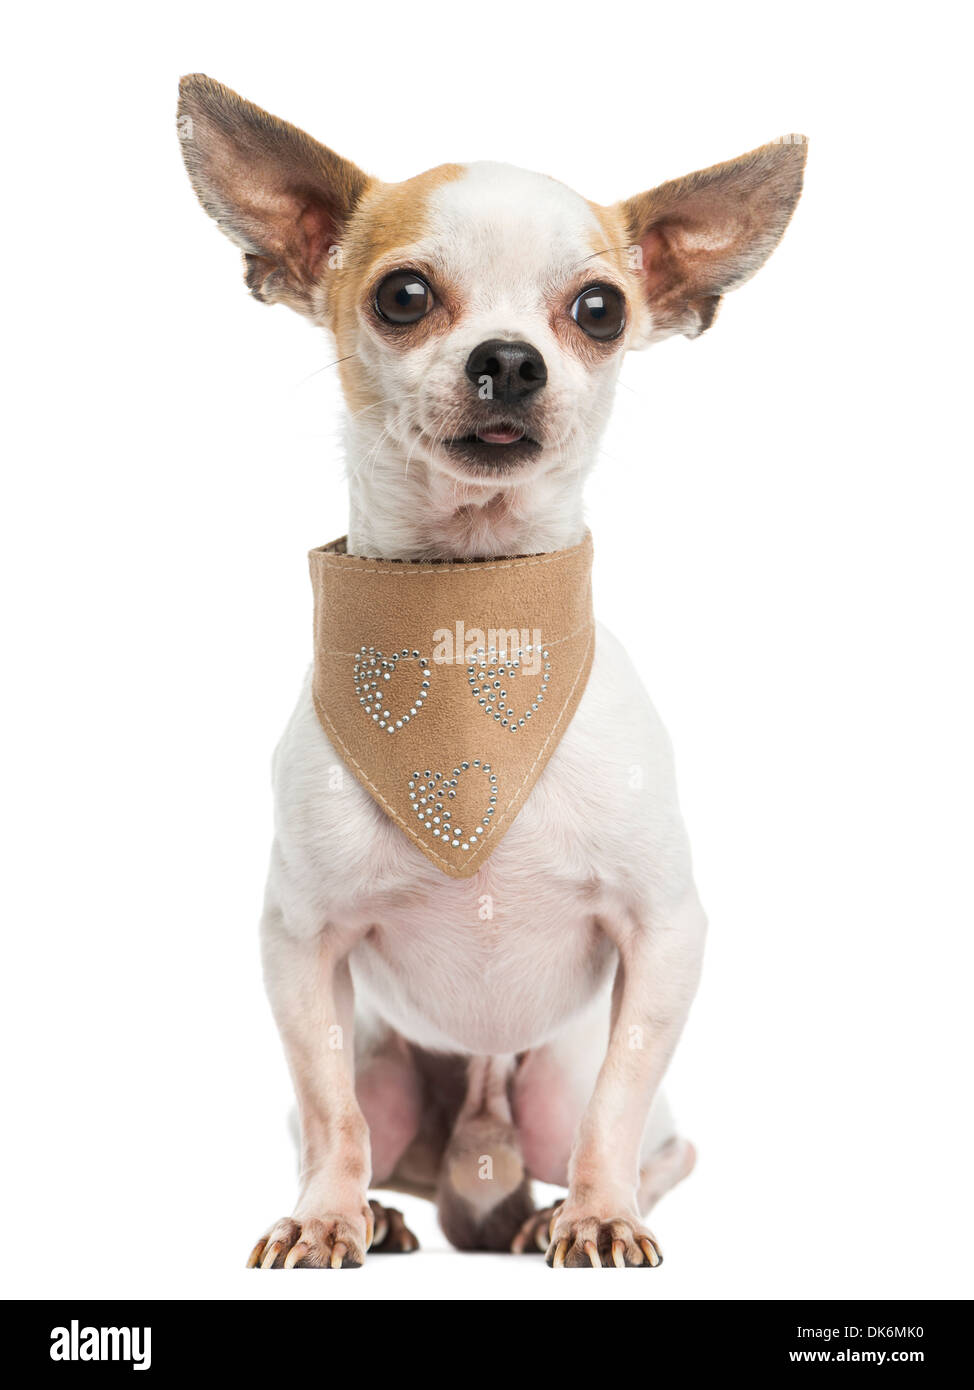 Chihuahua sitting, wearing a leather bandana, 5 years old, against white background Stock Photo